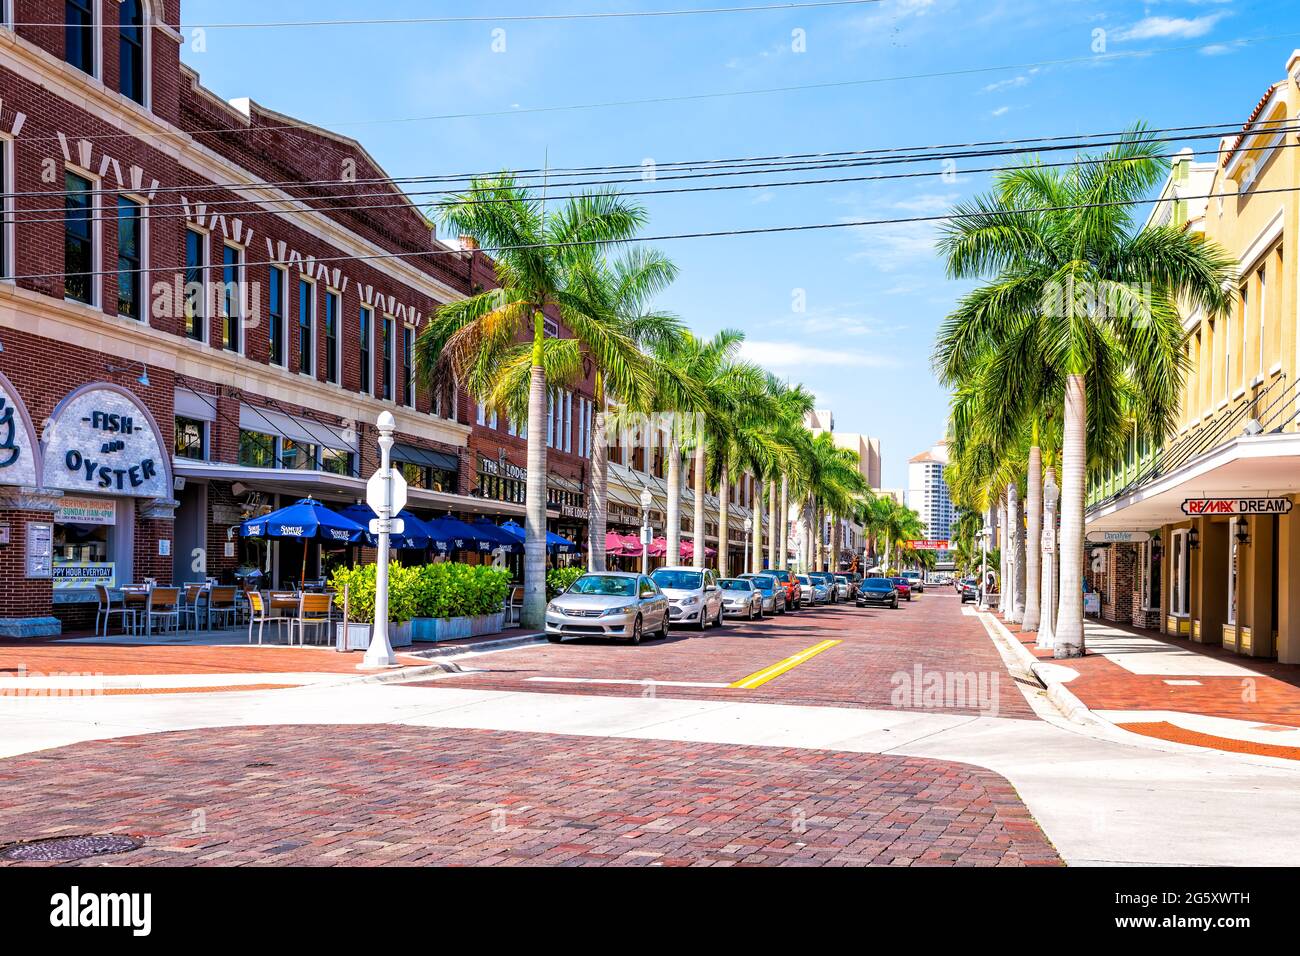 Fort Myers, USA - April 29, 2018: City town main street during sunny day in Florida gulf of mexico coast with shopping and restaurants row palm trees Stock Photo